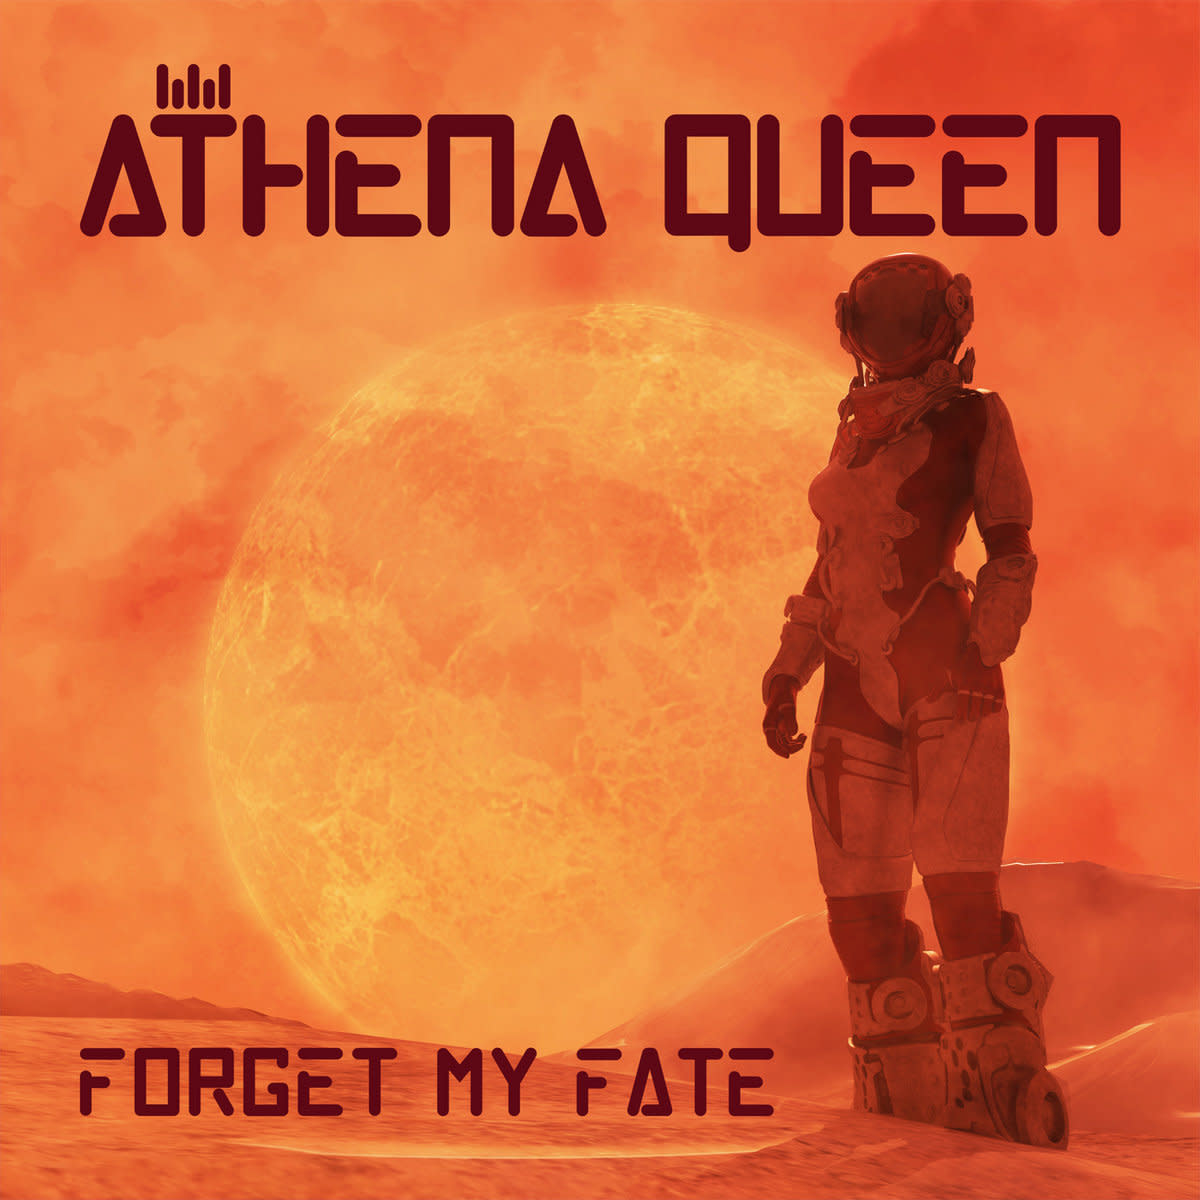 synth-album-review-forget-my-fate-by-athena-queen